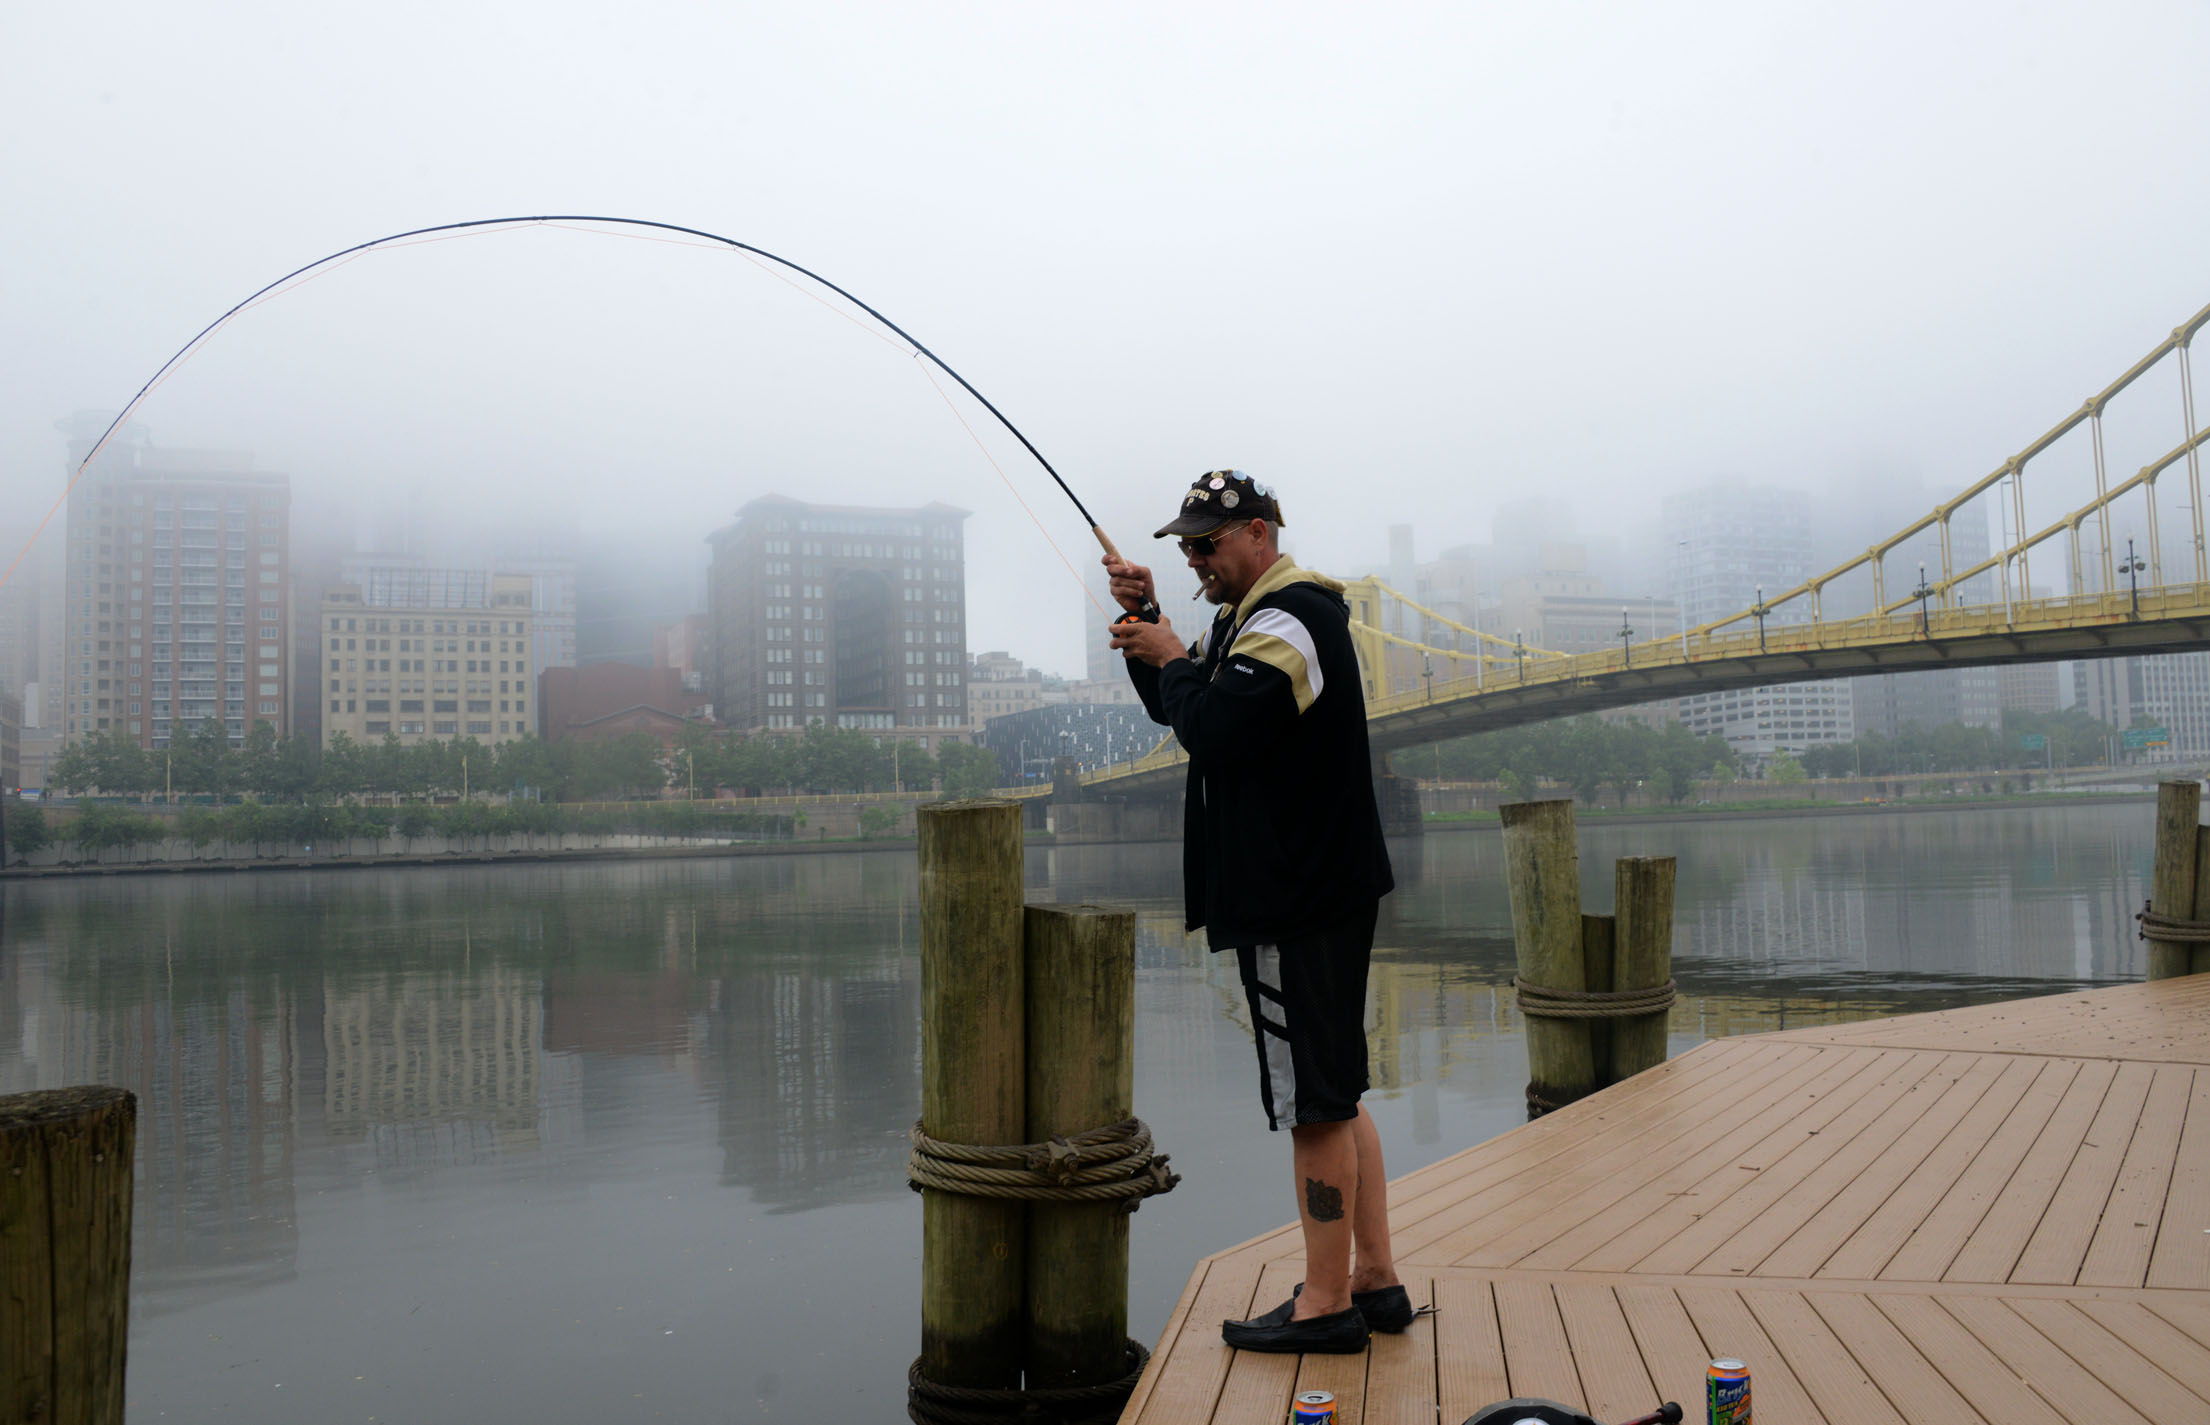 Russ Stratton , of the North Side, gets a "bite" while fishing in the Allegheny River , on the North Shore. (Darrell Sapp / Post-Gazette)